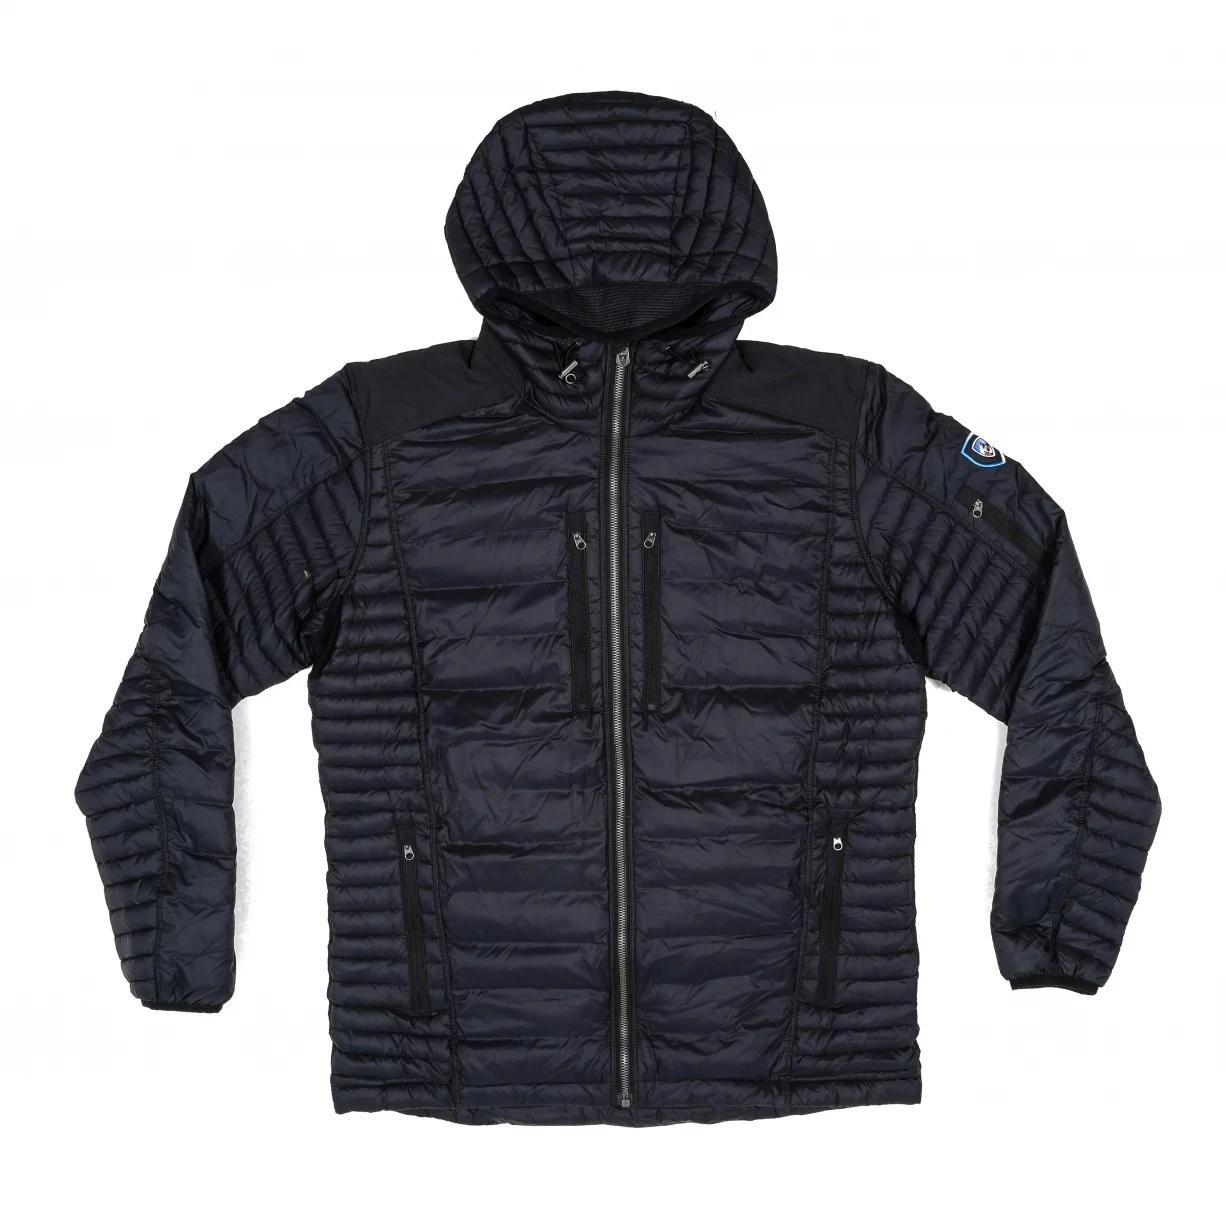 Kuhl Spyfire Hoody Jackets Embroidered